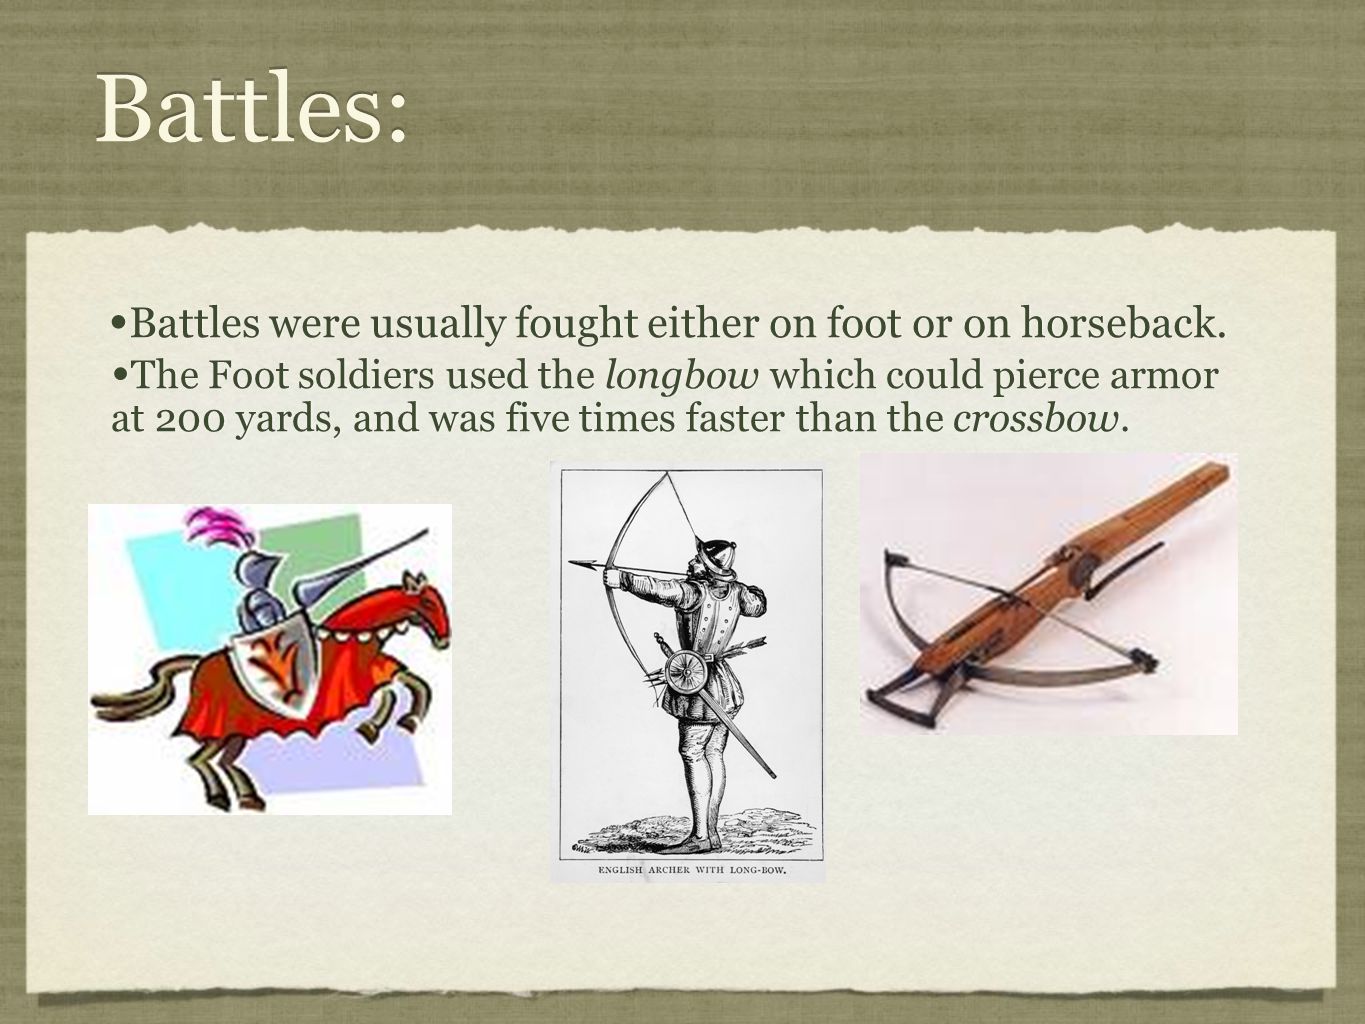 Battles: Battles were usually fought either on foot or on horseback.